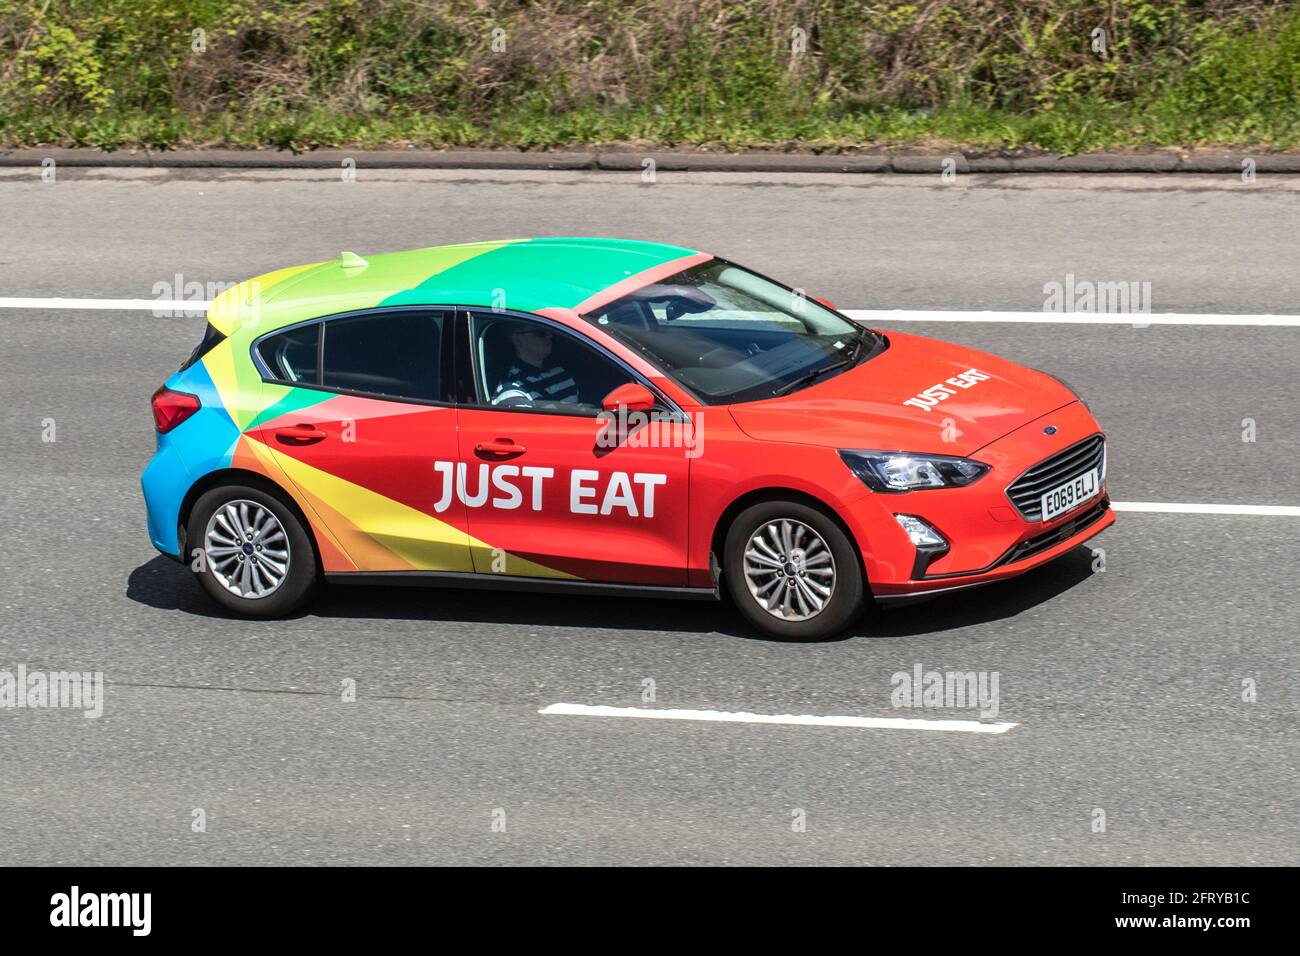 Just Eat 2019 Ford Focus Titanium Tdci red diesel hatchback; Vehicular traffic moving vehicles, catering commercial vans, foods courier on the Just Eat network, takeaway food business vehicle, livered cars driving vehicle on UK roads, motors, motoring on the M6 motorway highway network. Stock Photo